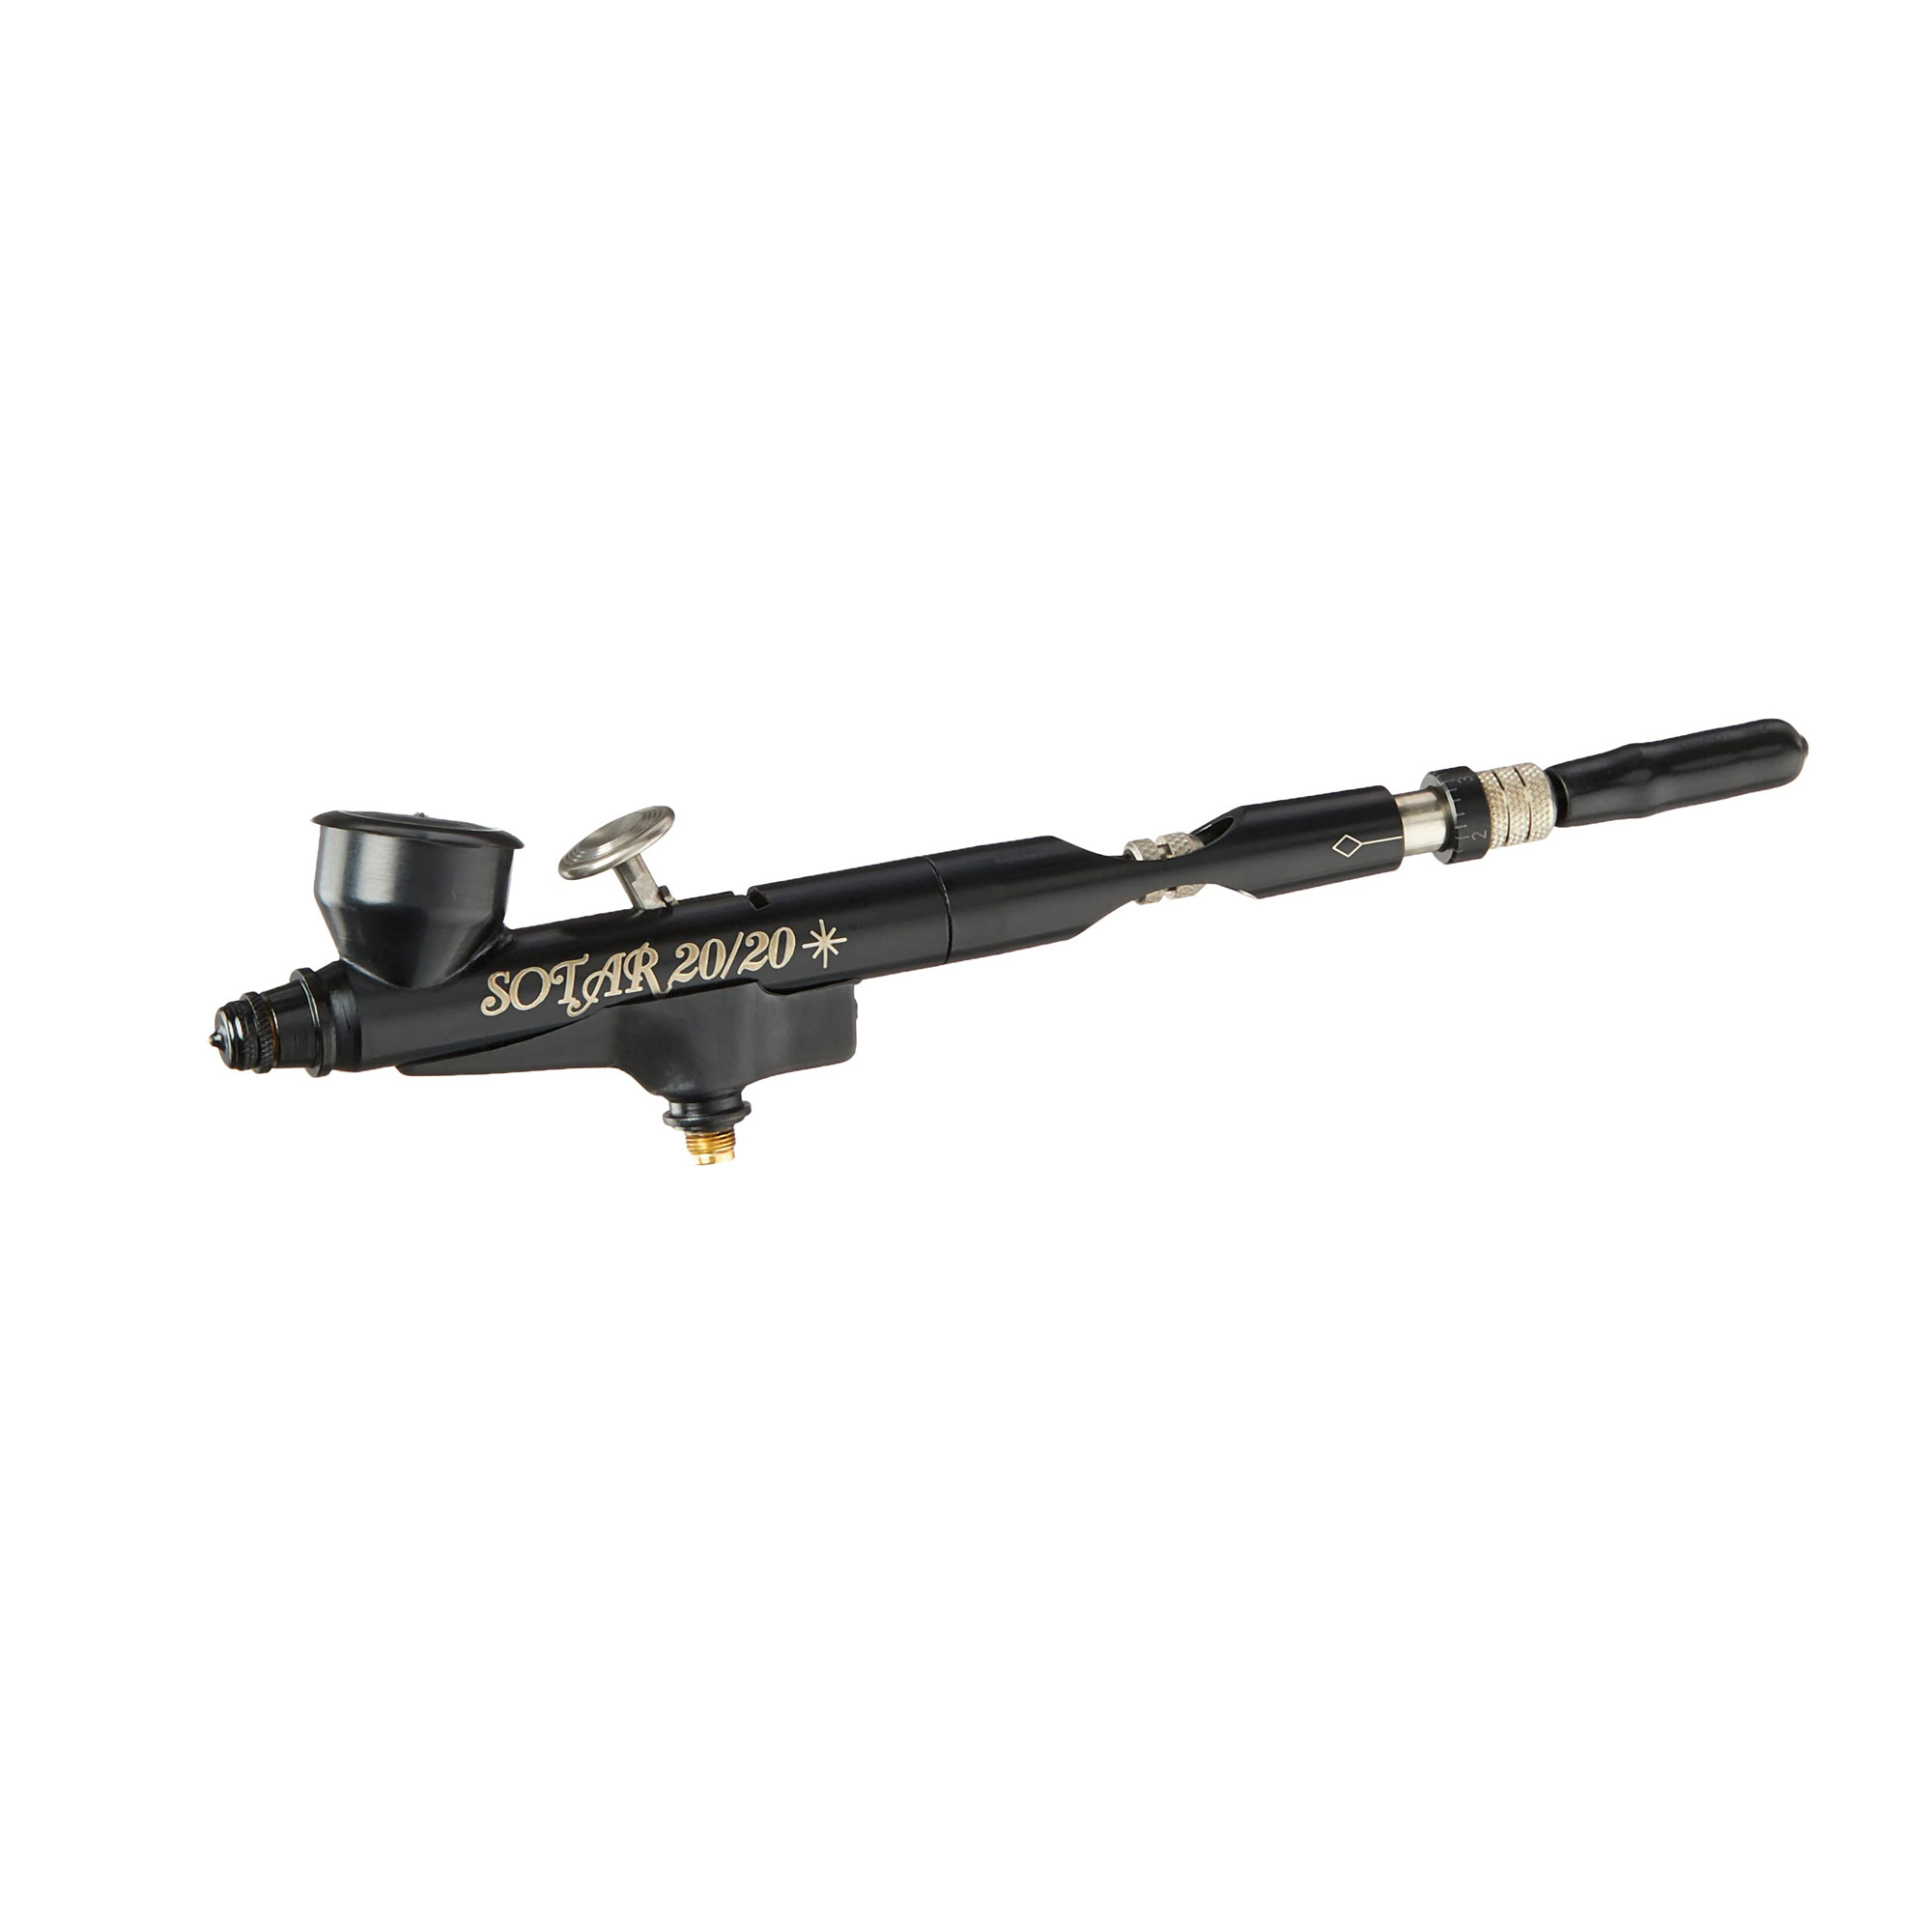 Badger 2020-2F Air-Brush Sotar 2020 with Cup, Large Gravity Feed Dual